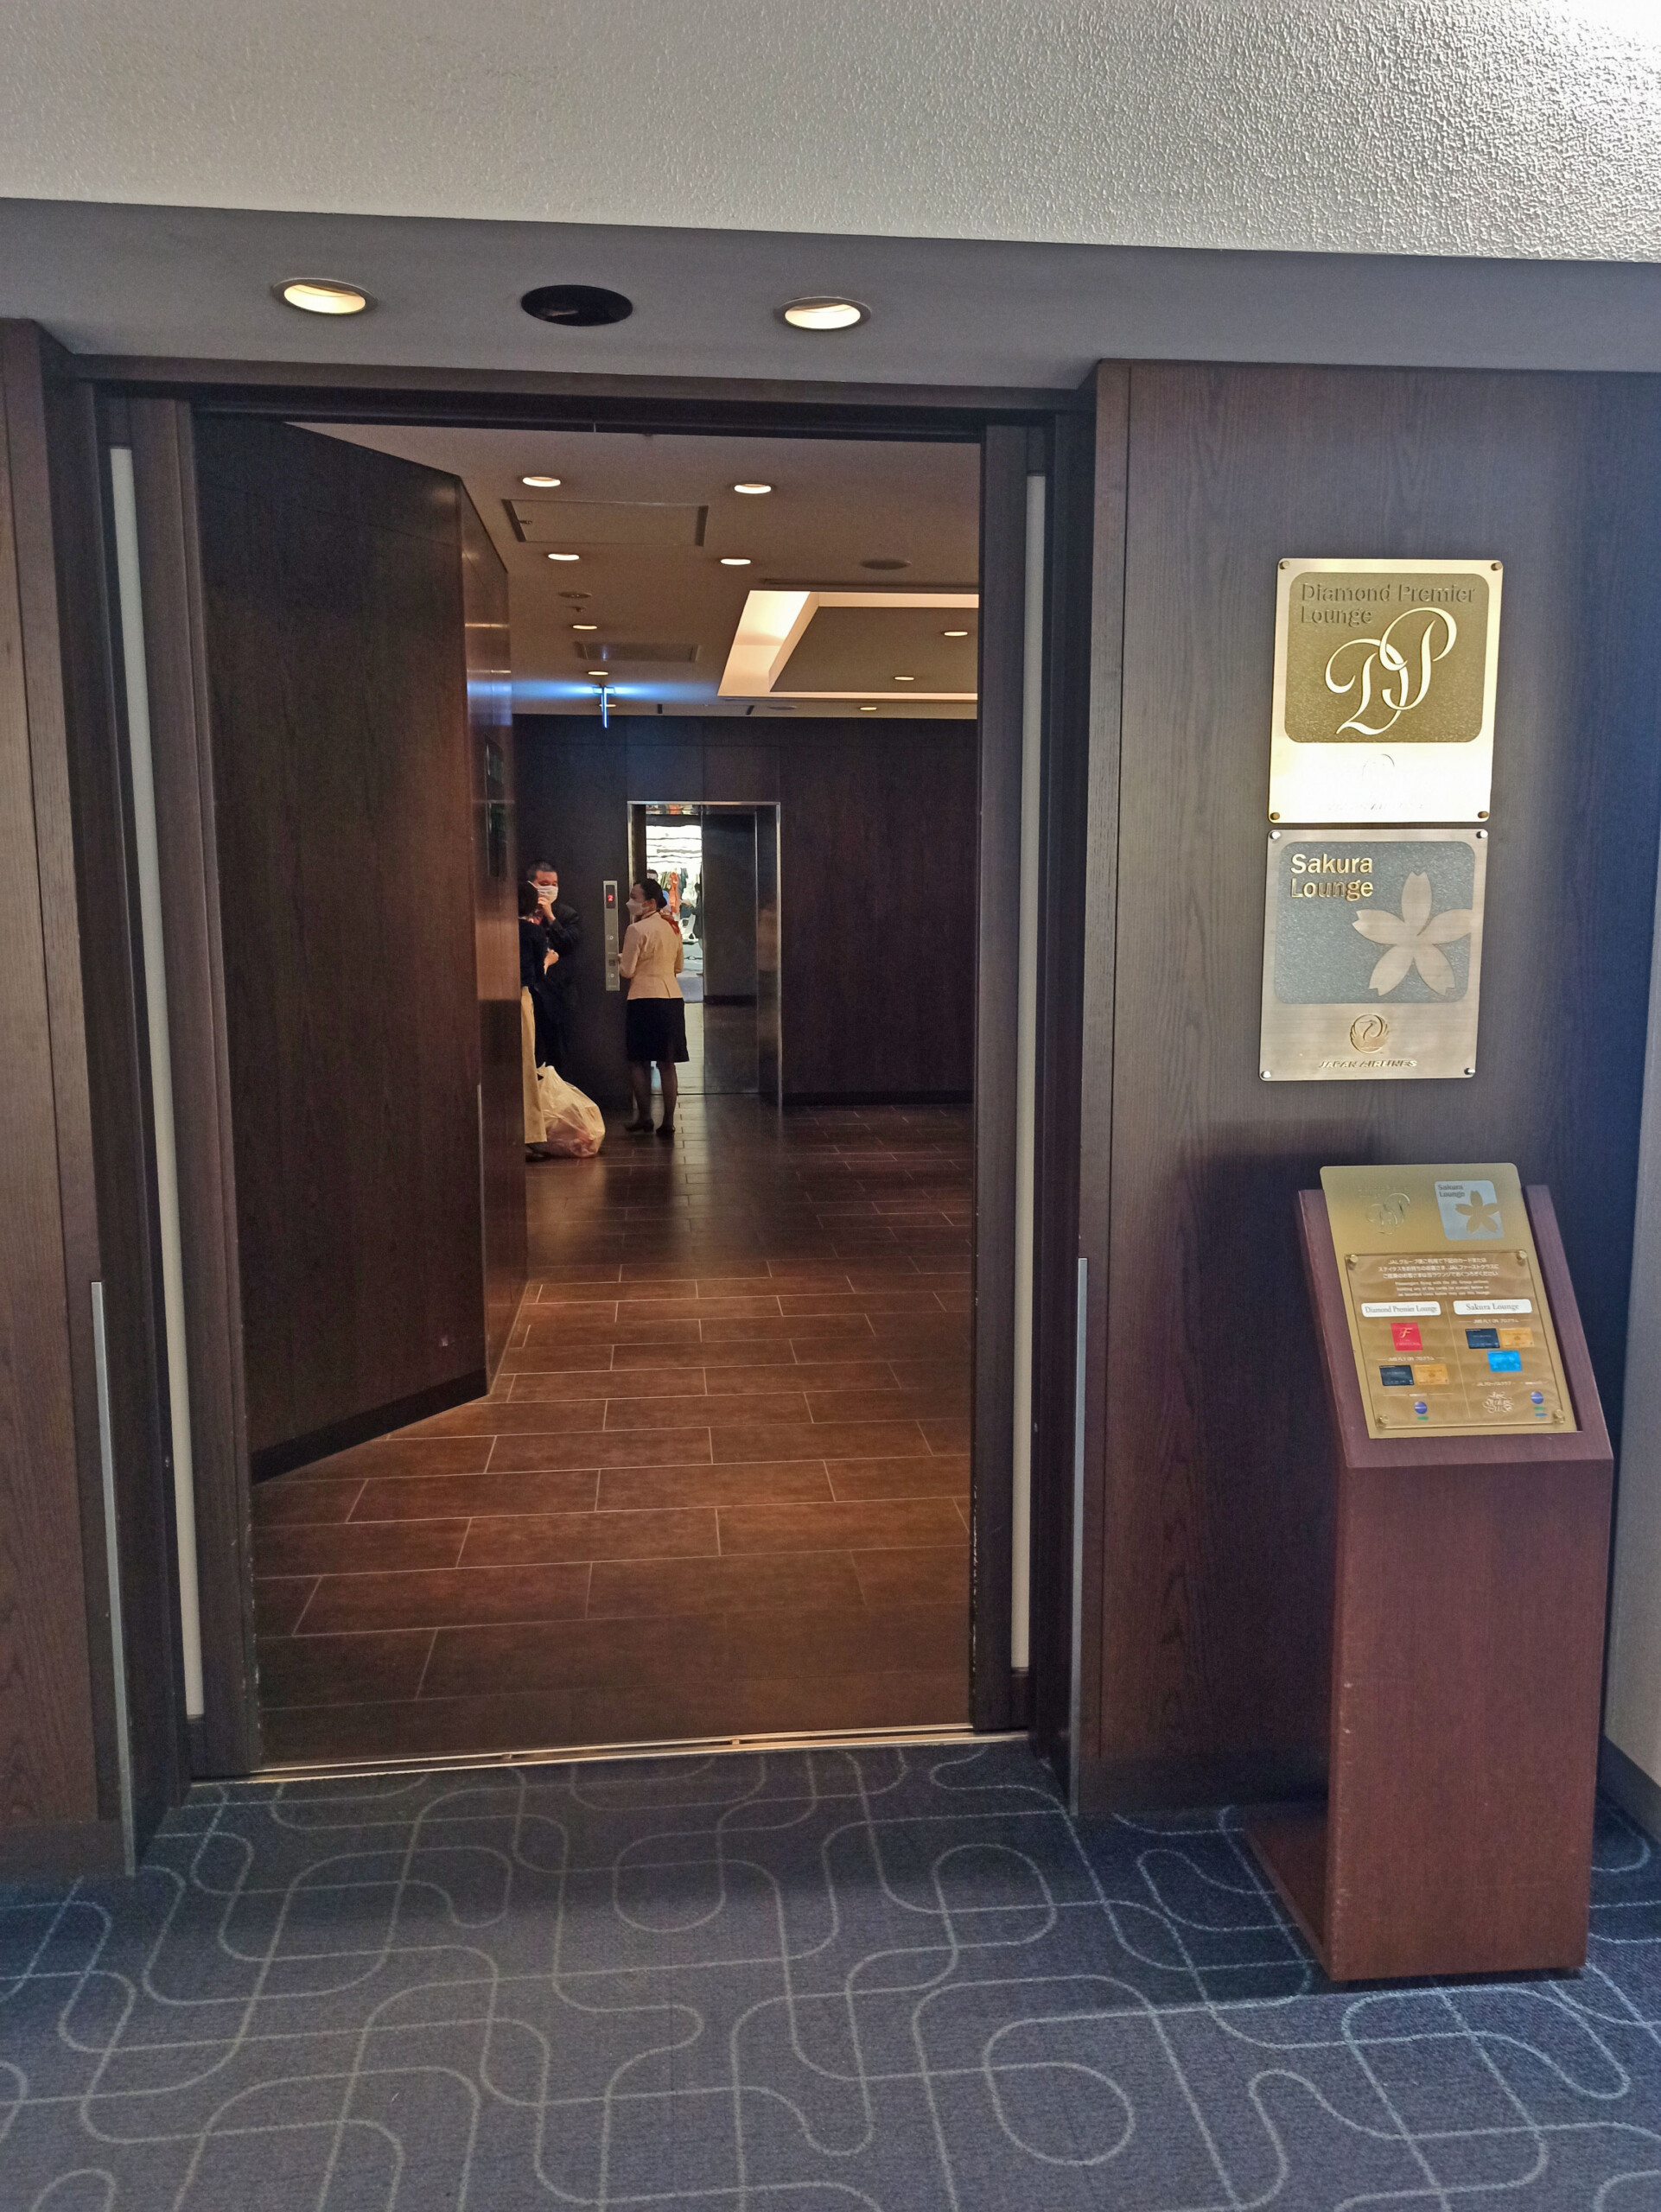 Japan Airlines Entrance to Lounges